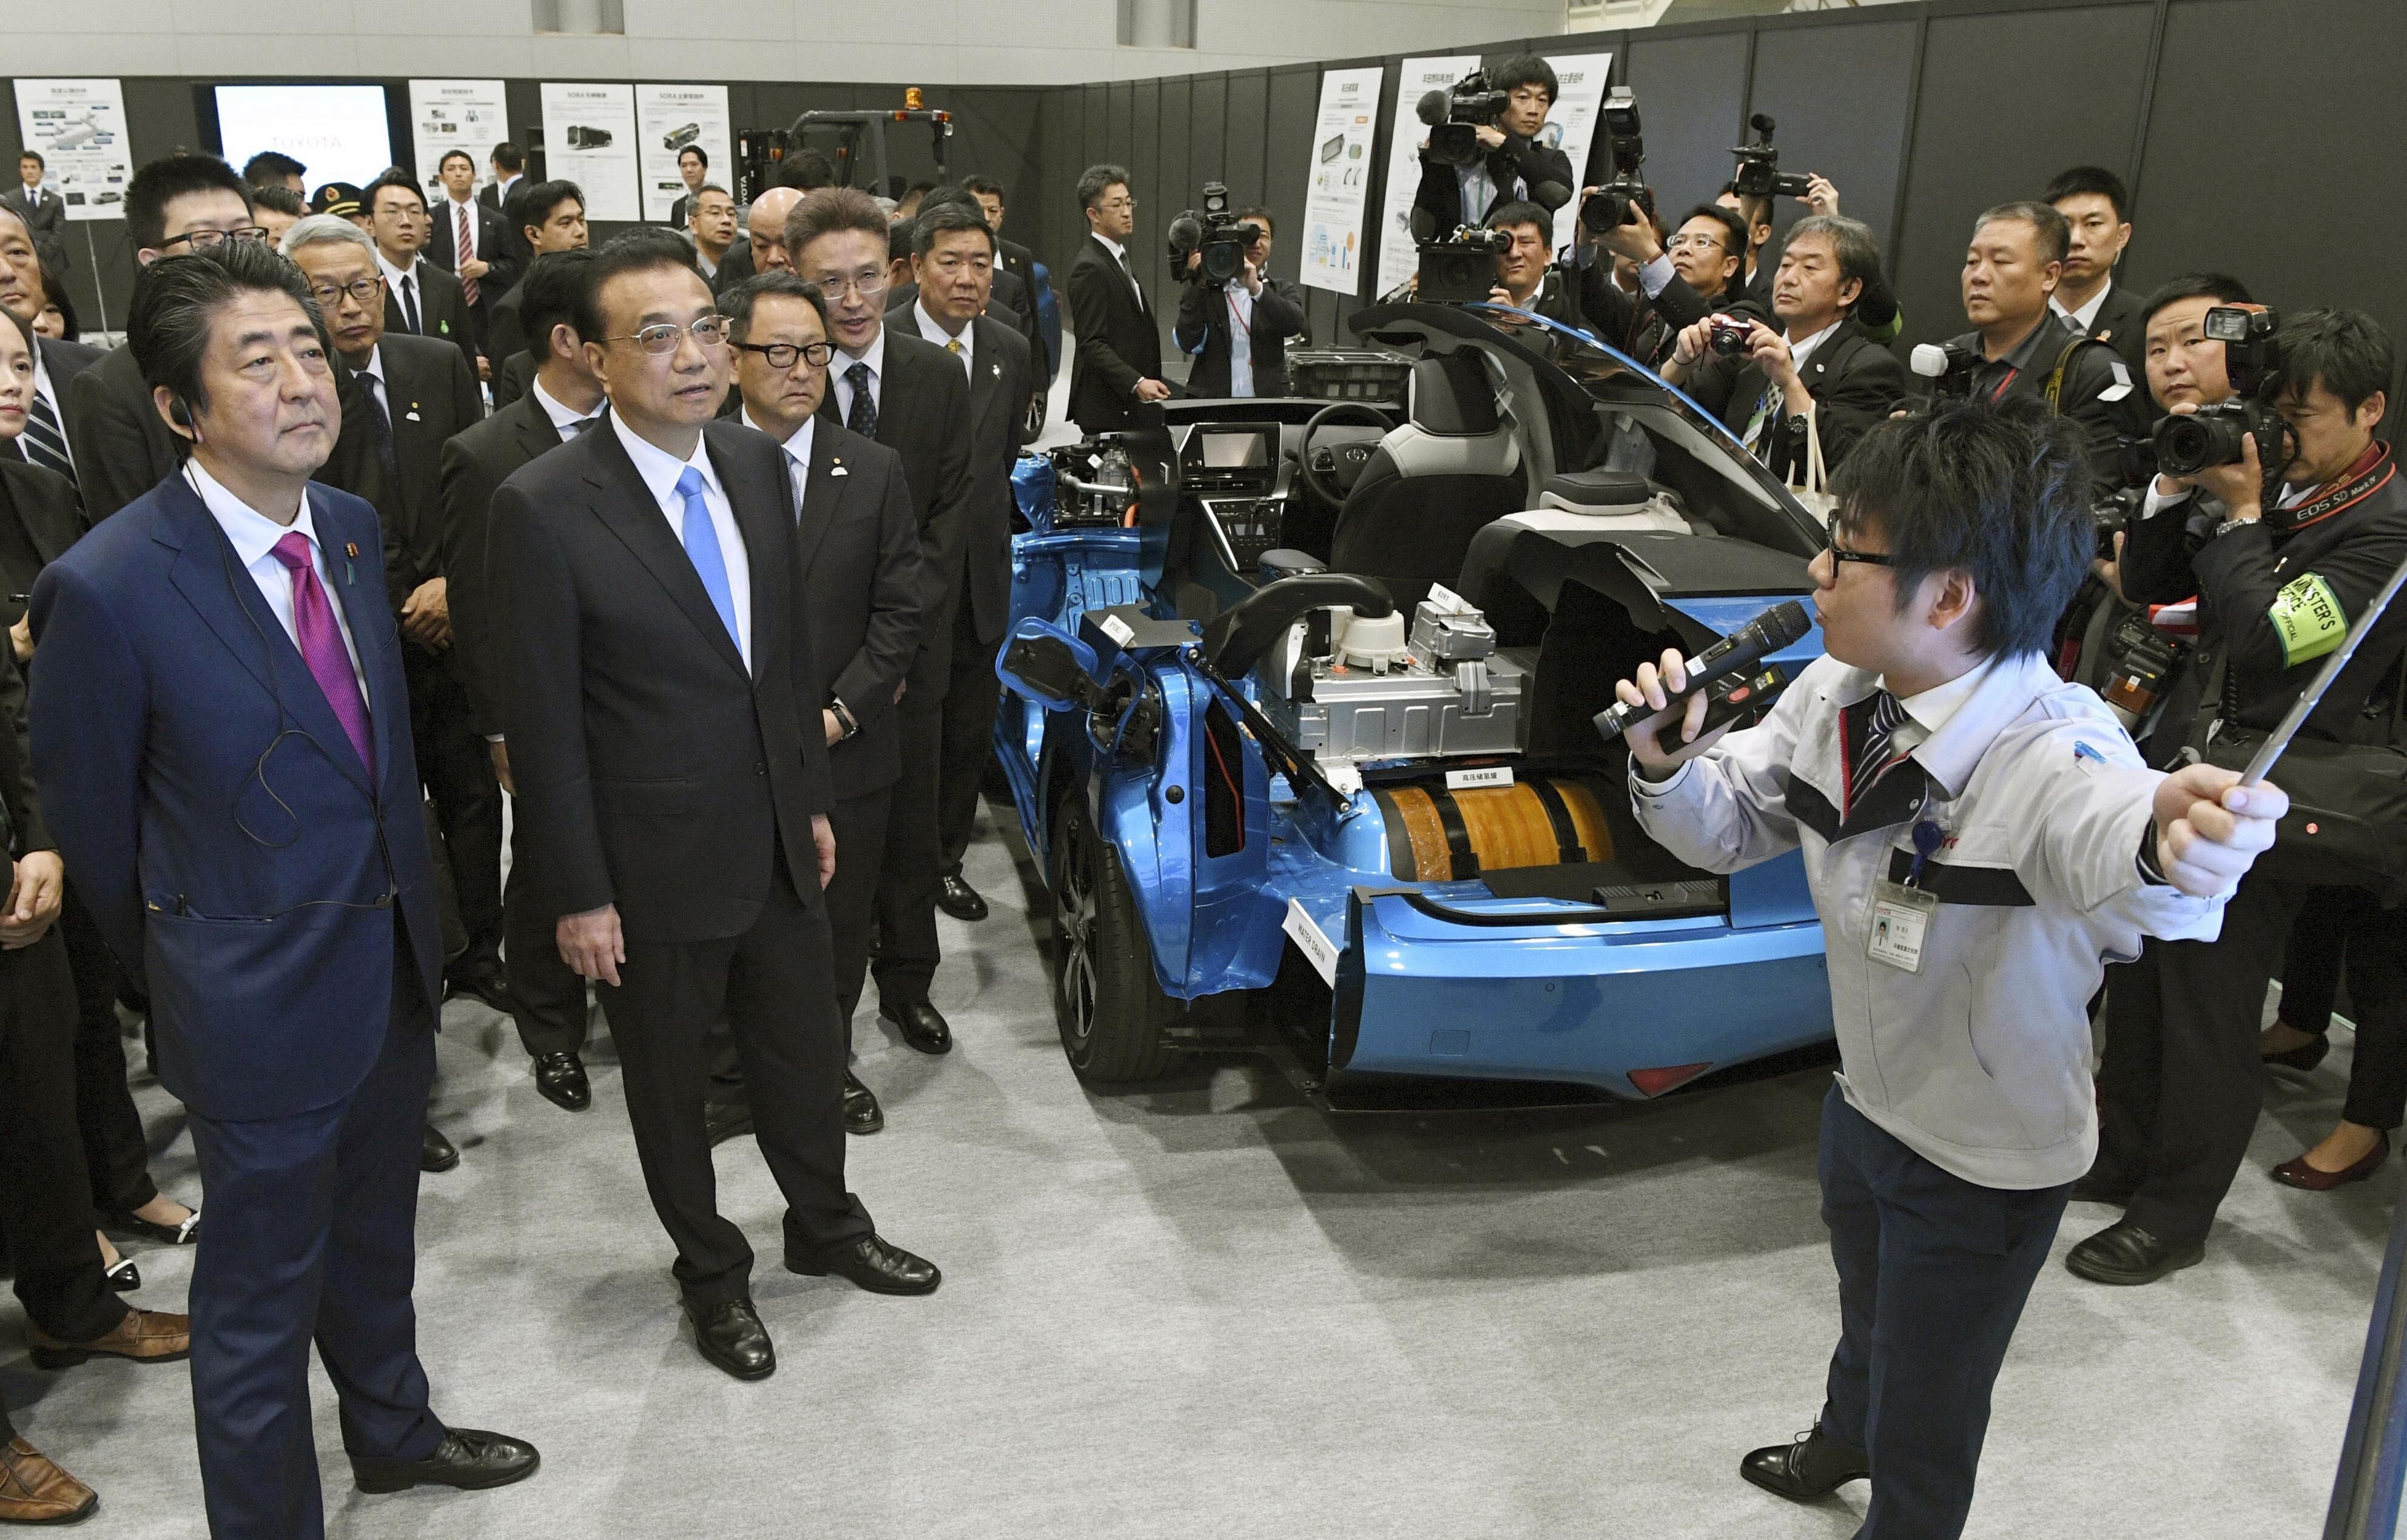 Japanese Prime Minister Shinzo Abe (left) and Chinese Premier Li Keqiang (second from left) visit a Toyota Motor factory in Tomakomai, Japan, on May 11, 2018. Photo: Kyodo